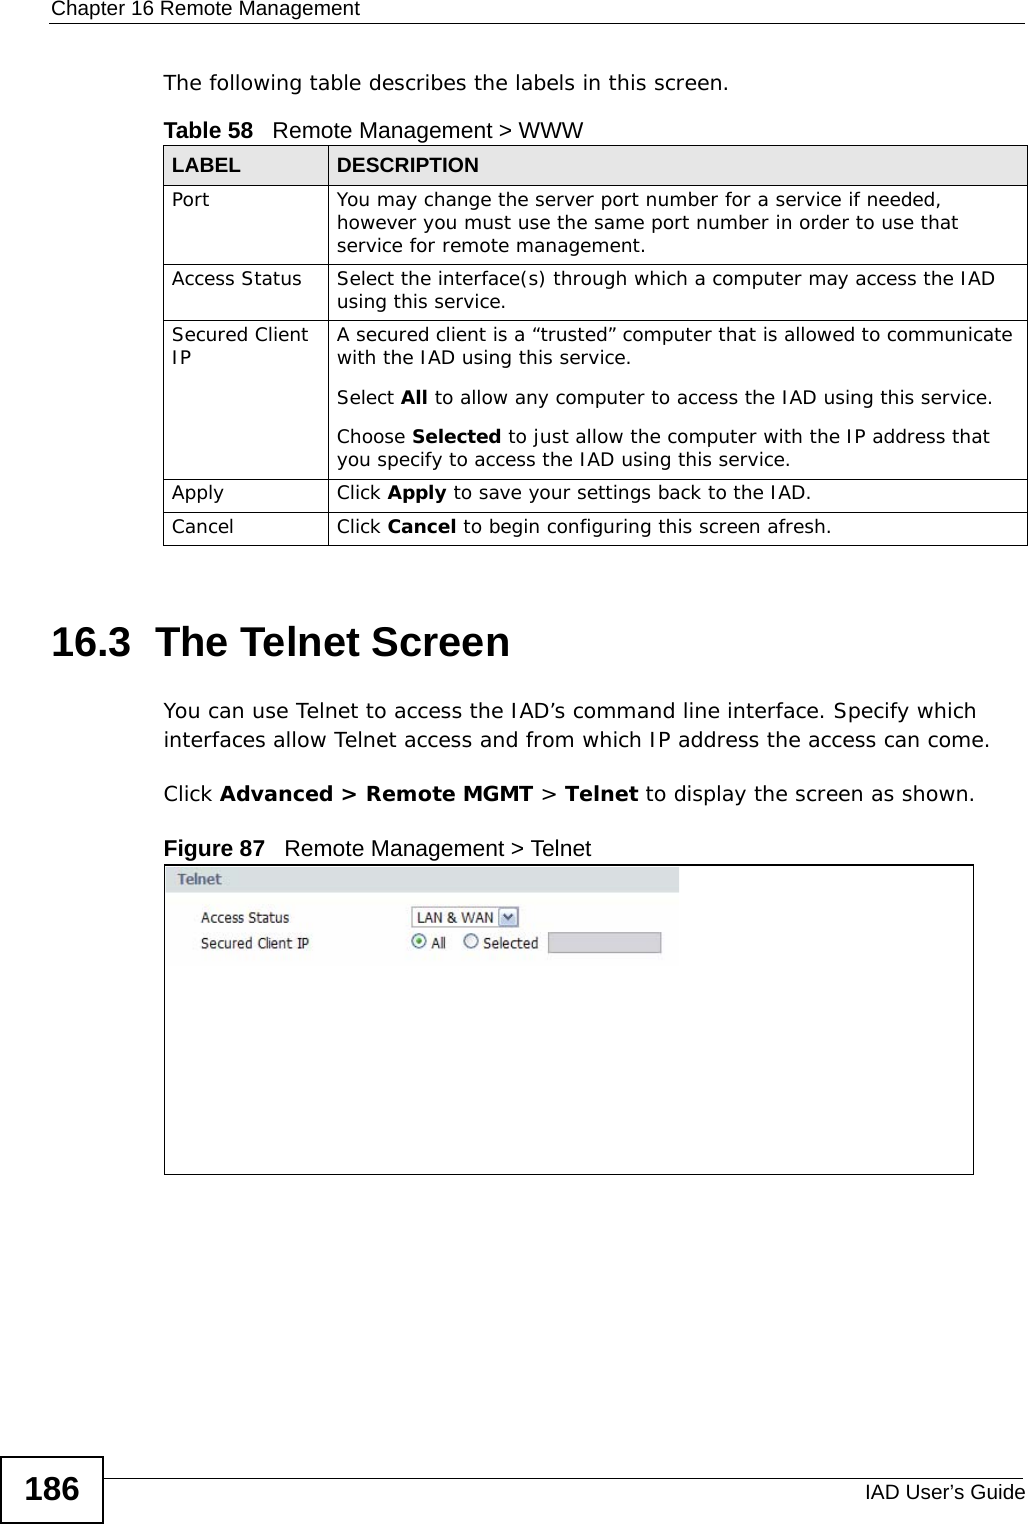 Chapter 16 Remote ManagementIAD User’s Guide186The following table describes the labels in this screen.16.3  The Telnet ScreenYou can use Telnet to access the IAD’s command line interface. Specify which interfaces allow Telnet access and from which IP address the access can come.Click Advanced &gt; Remote MGMT &gt; Telnet to display the screen as shown. Figure 87   Remote Management &gt; TelnetTable 58   Remote Management &gt; WWWLABEL DESCRIPTIONPort You may change the server port number for a service if needed, however you must use the same port number in order to use that service for remote management.Access Status Select the interface(s) through which a computer may access the IAD using this service.Secured Client IP A secured client is a “trusted” computer that is allowed to communicate with the IAD using this service. Select All to allow any computer to access the IAD using this service.Choose Selected to just allow the computer with the IP address that you specify to access the IAD using this service.Apply Click Apply to save your settings back to the IAD. Cancel Click Cancel to begin configuring this screen afresh.